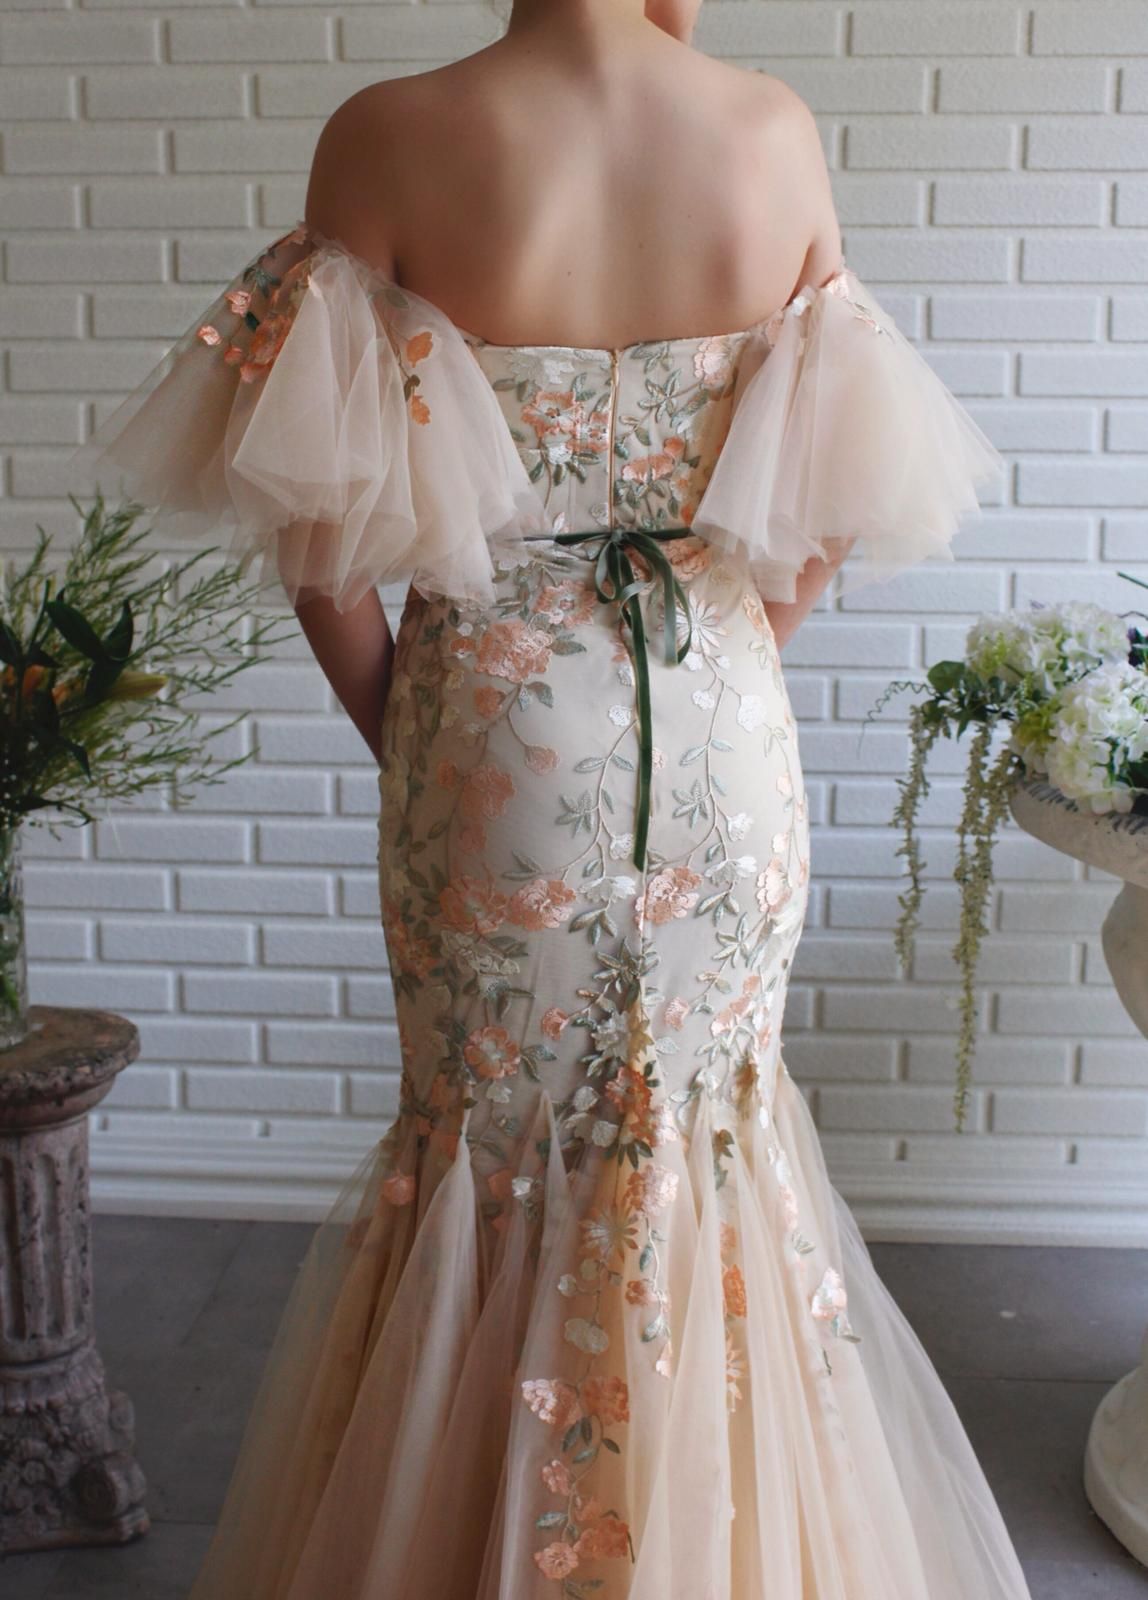 Beige mermaid dress with embroidery and off the shoulder sleeves